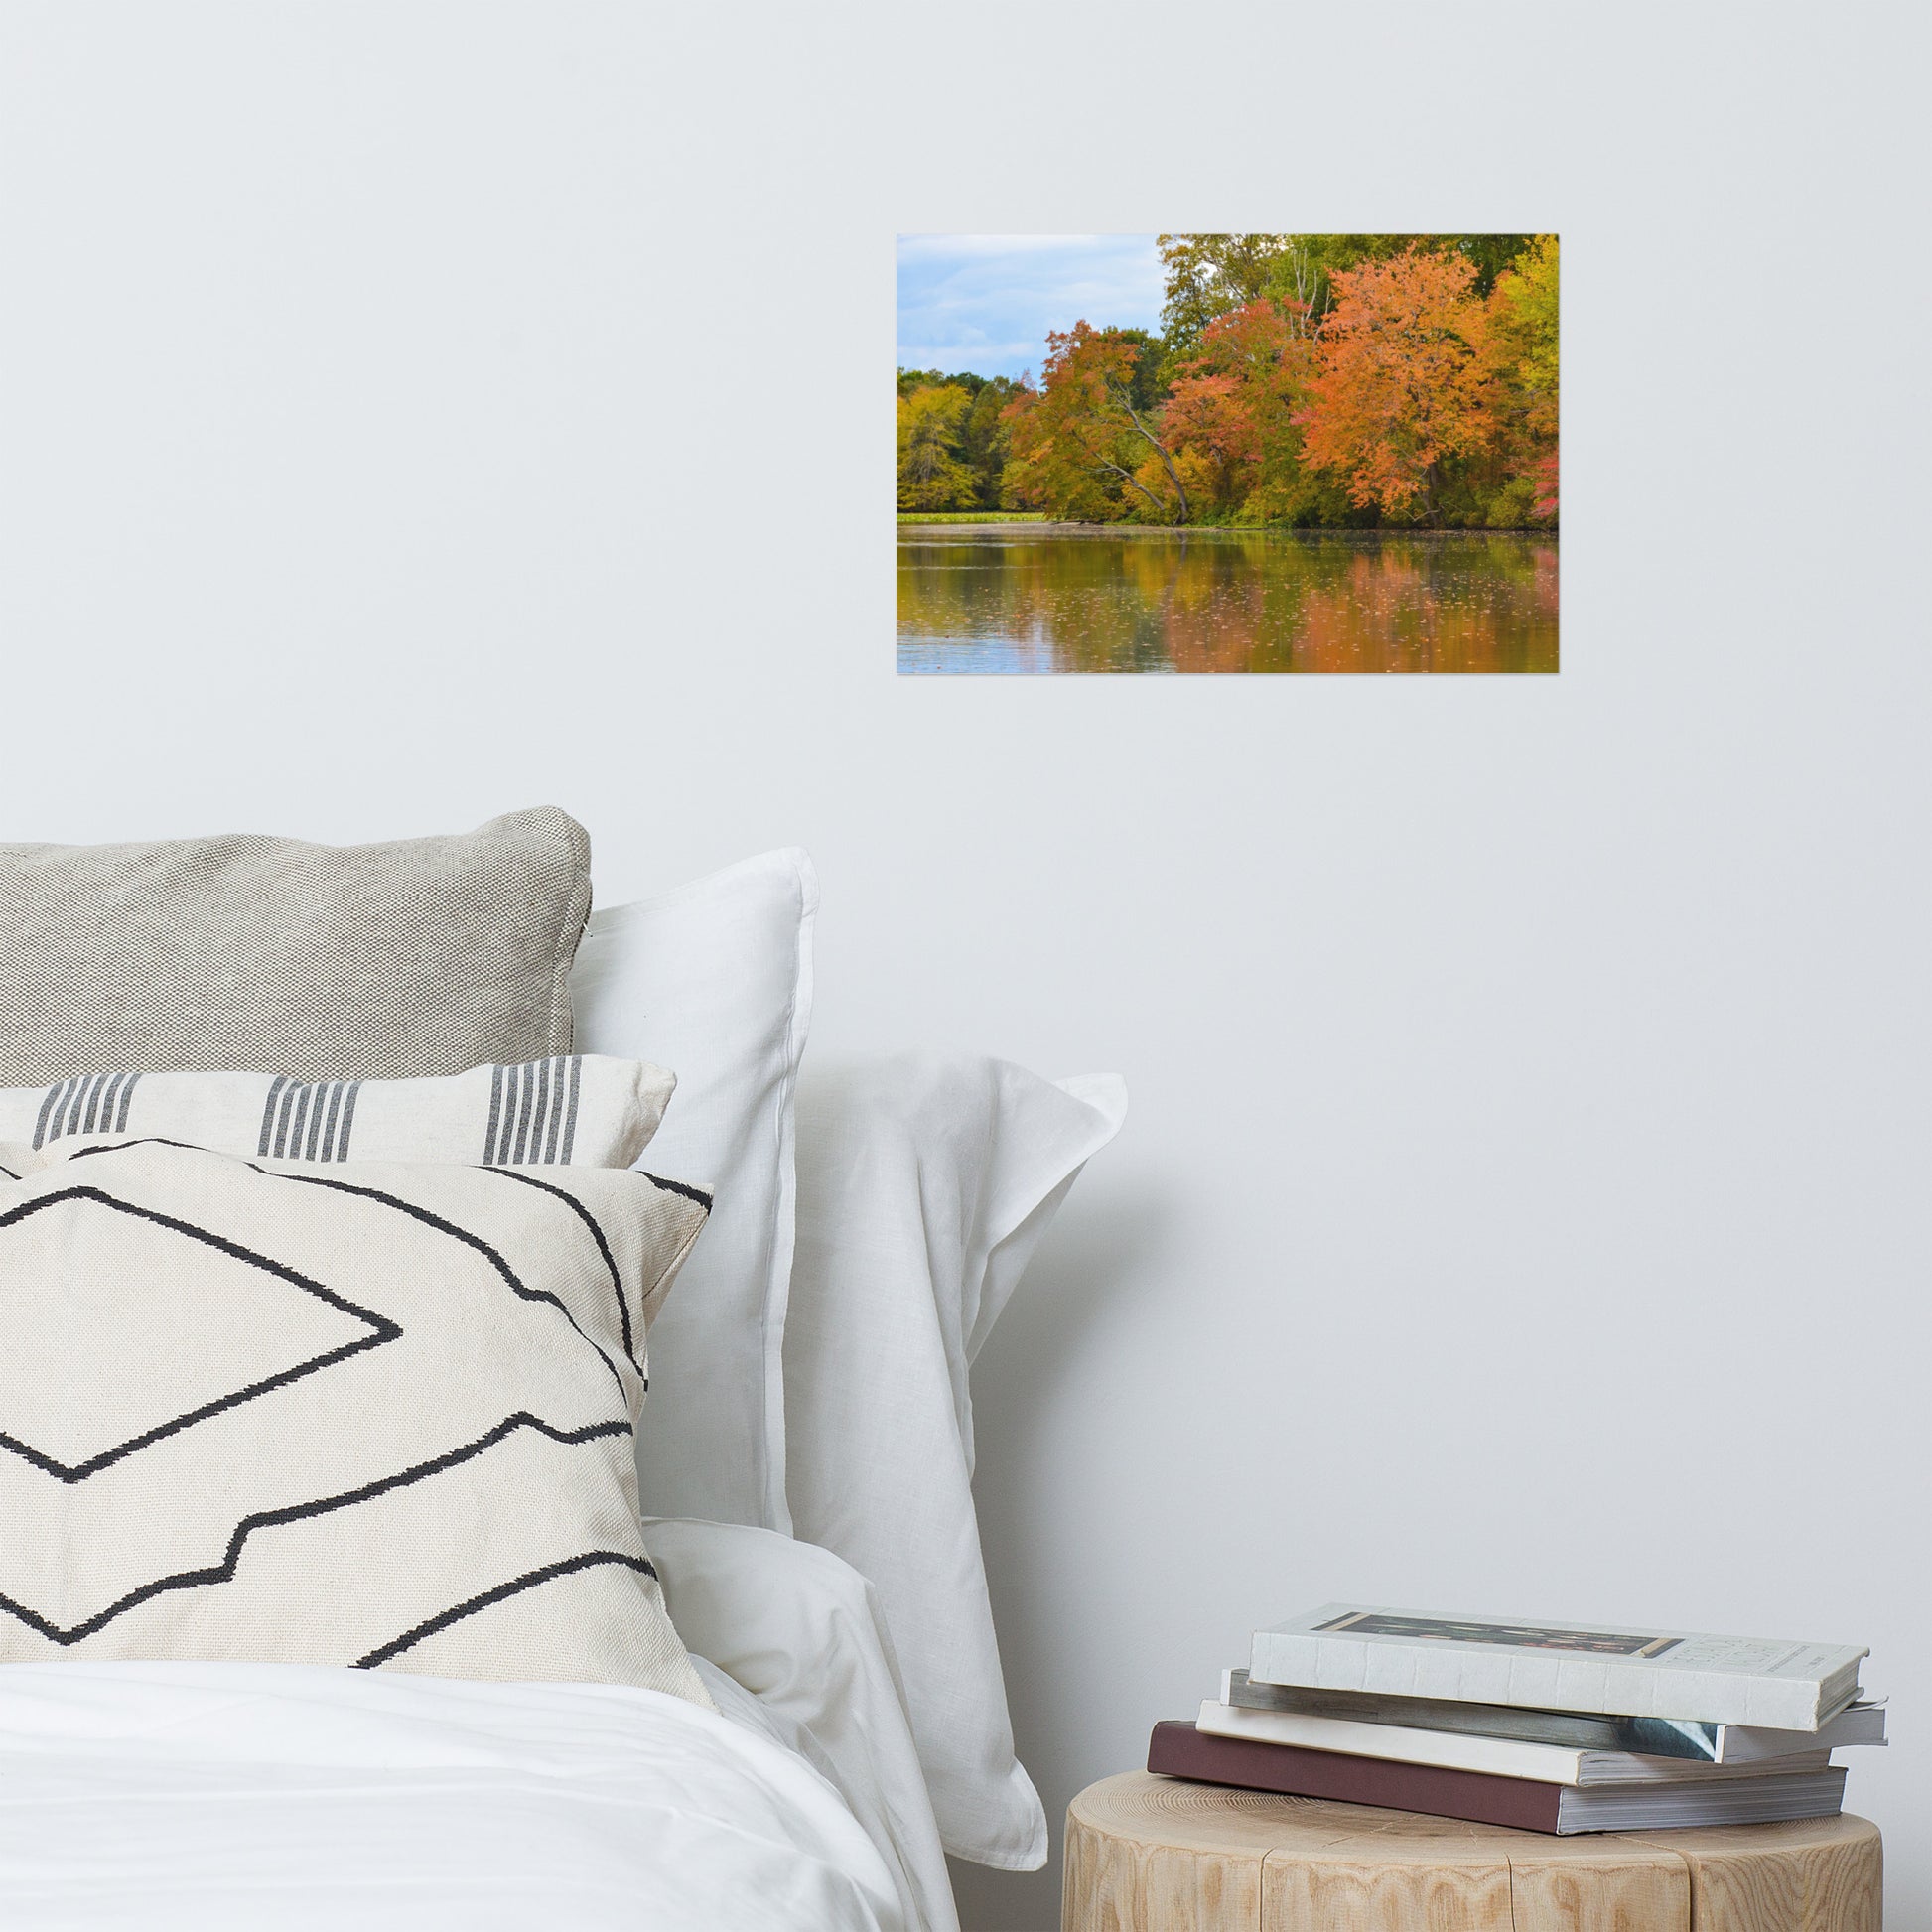 Art Above Bed Headboard: Colorful Trees in Fall Color Edge of Pond - Rural / Country Style Landscape / Nature Loose / Unframed / Frameless / Frameable Photograph Wall Art Print - Artwork